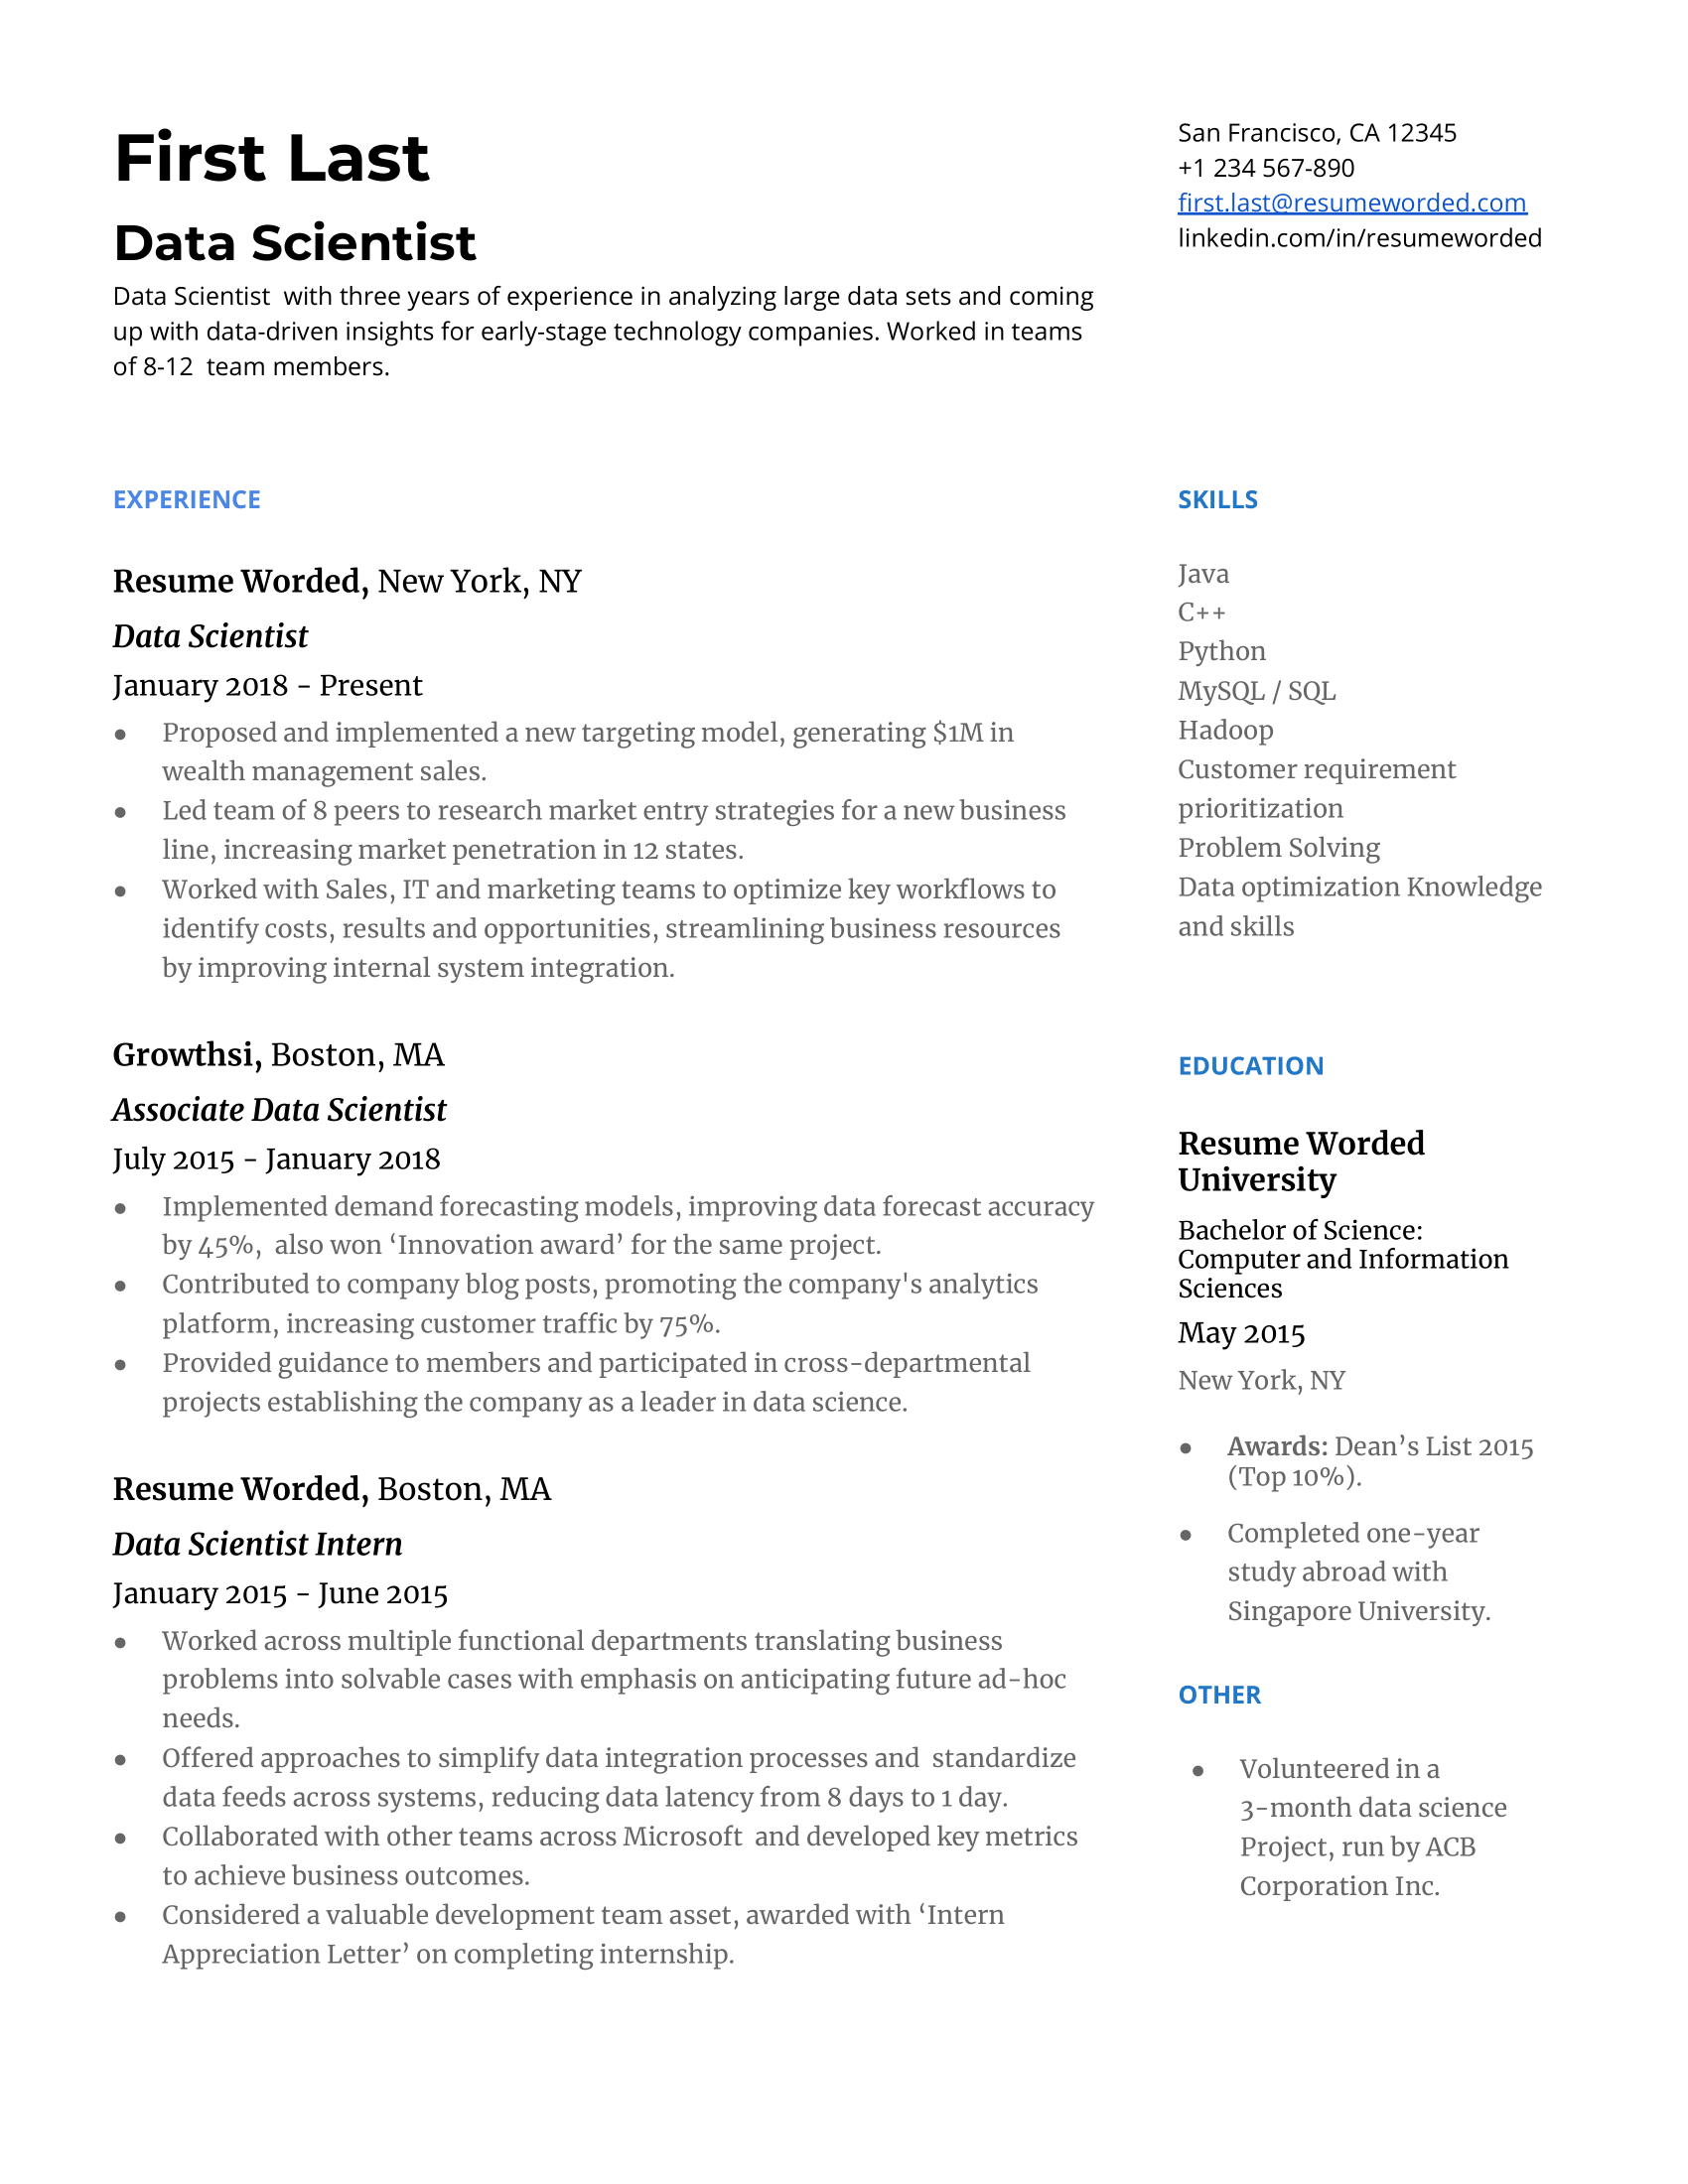 A data scientist resume template including big data and programming skills.